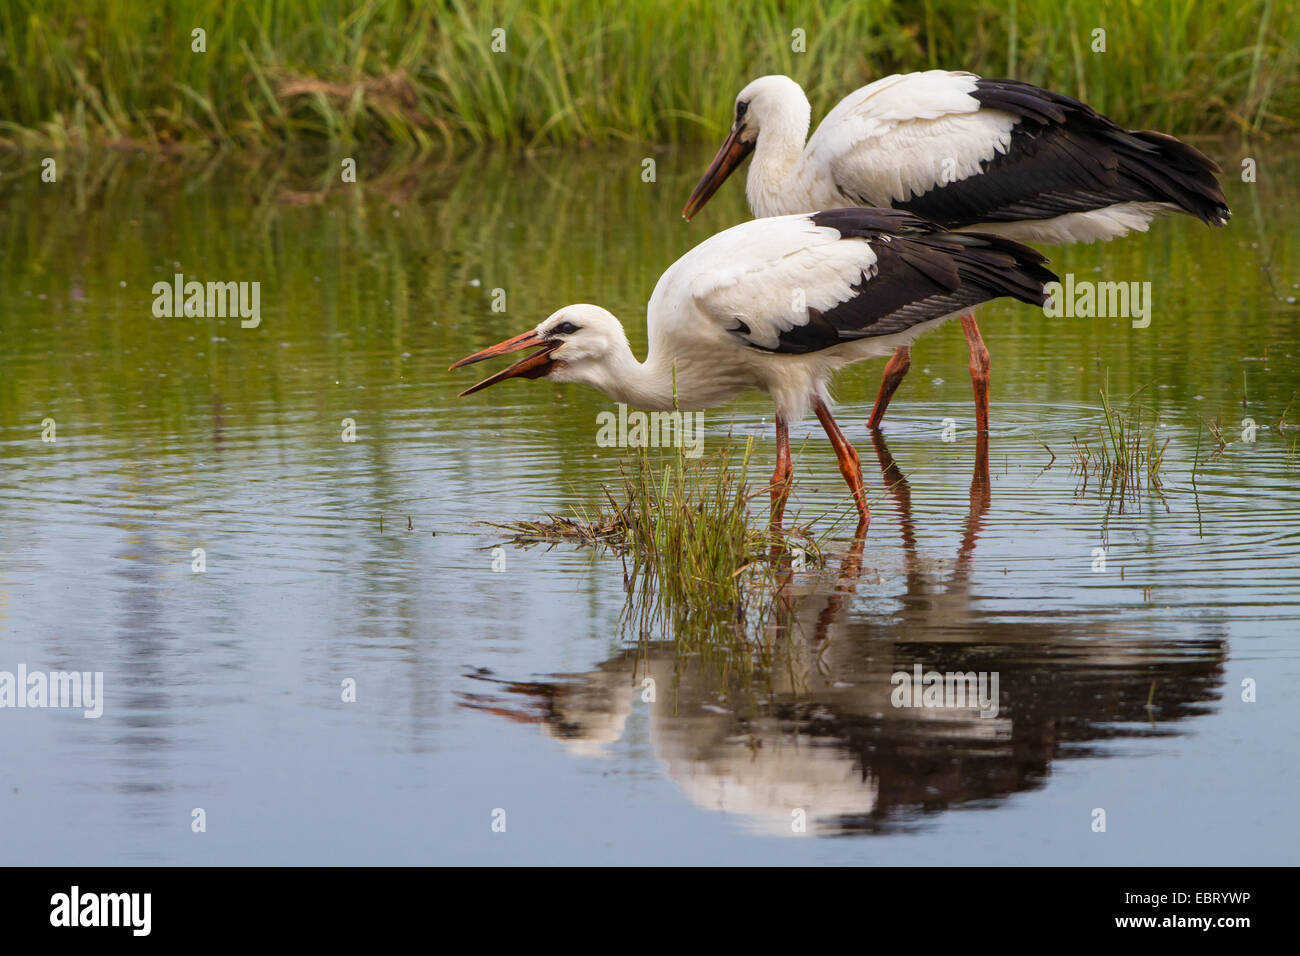 white stork (Ciconia ciconia), two young white storks on the feed in a pond, Switzerland, Sankt Gallen, Rheineck Stock Photo